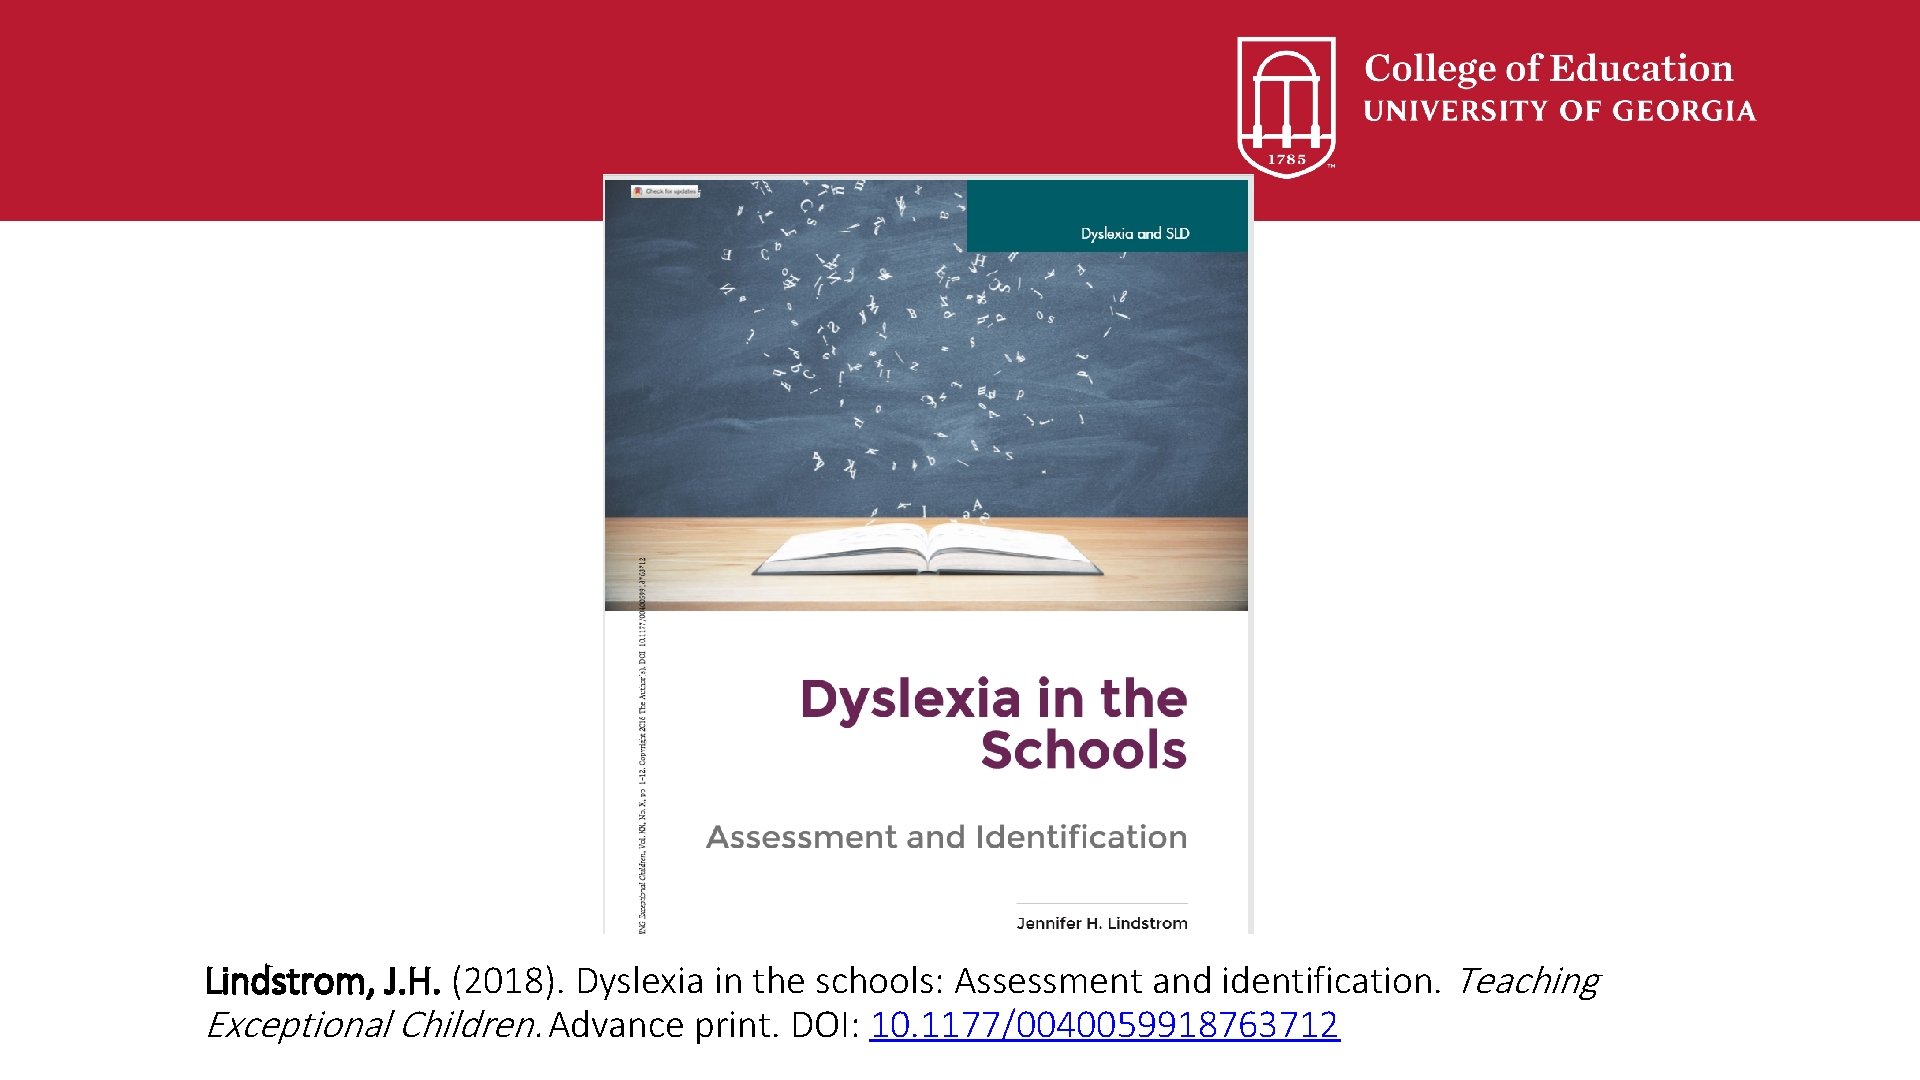 Lindstrom, J. H. (2018). Dyslexia in the schools: Assessment and identification. Teaching Exceptional Children.